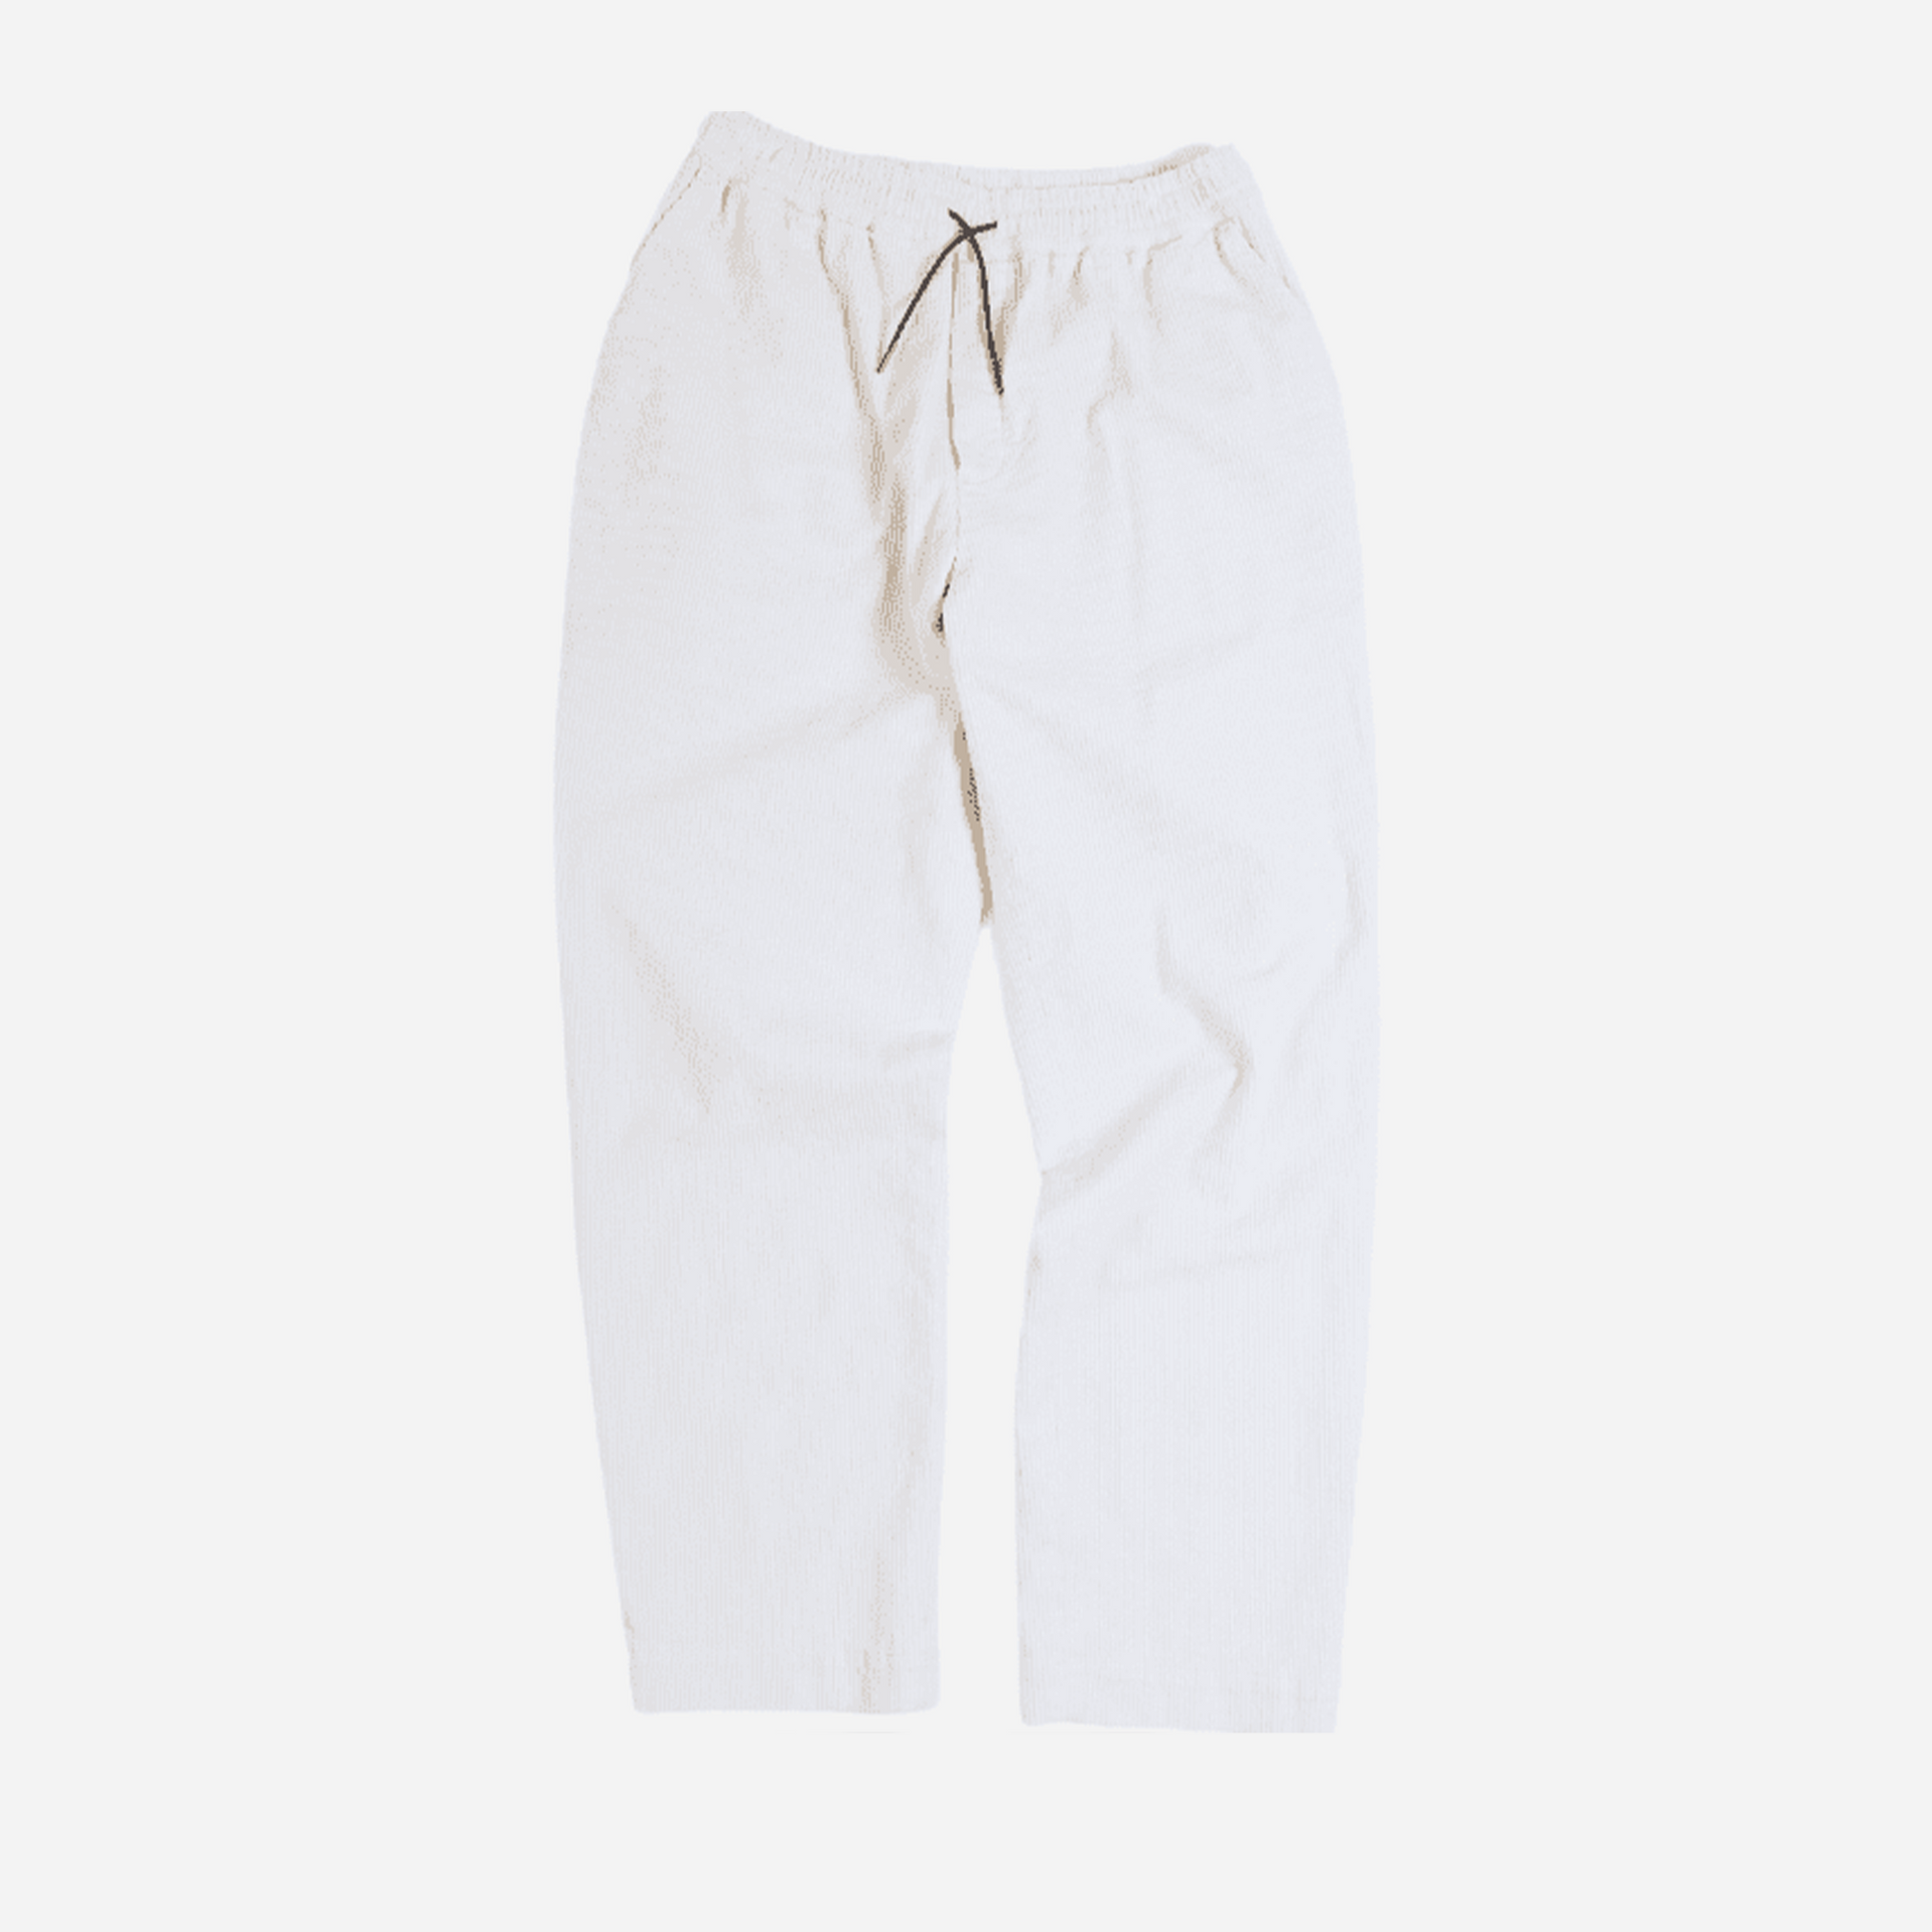 New Amsterdam Surf Association Work Trouser Cord Off-White - Hympala Store 